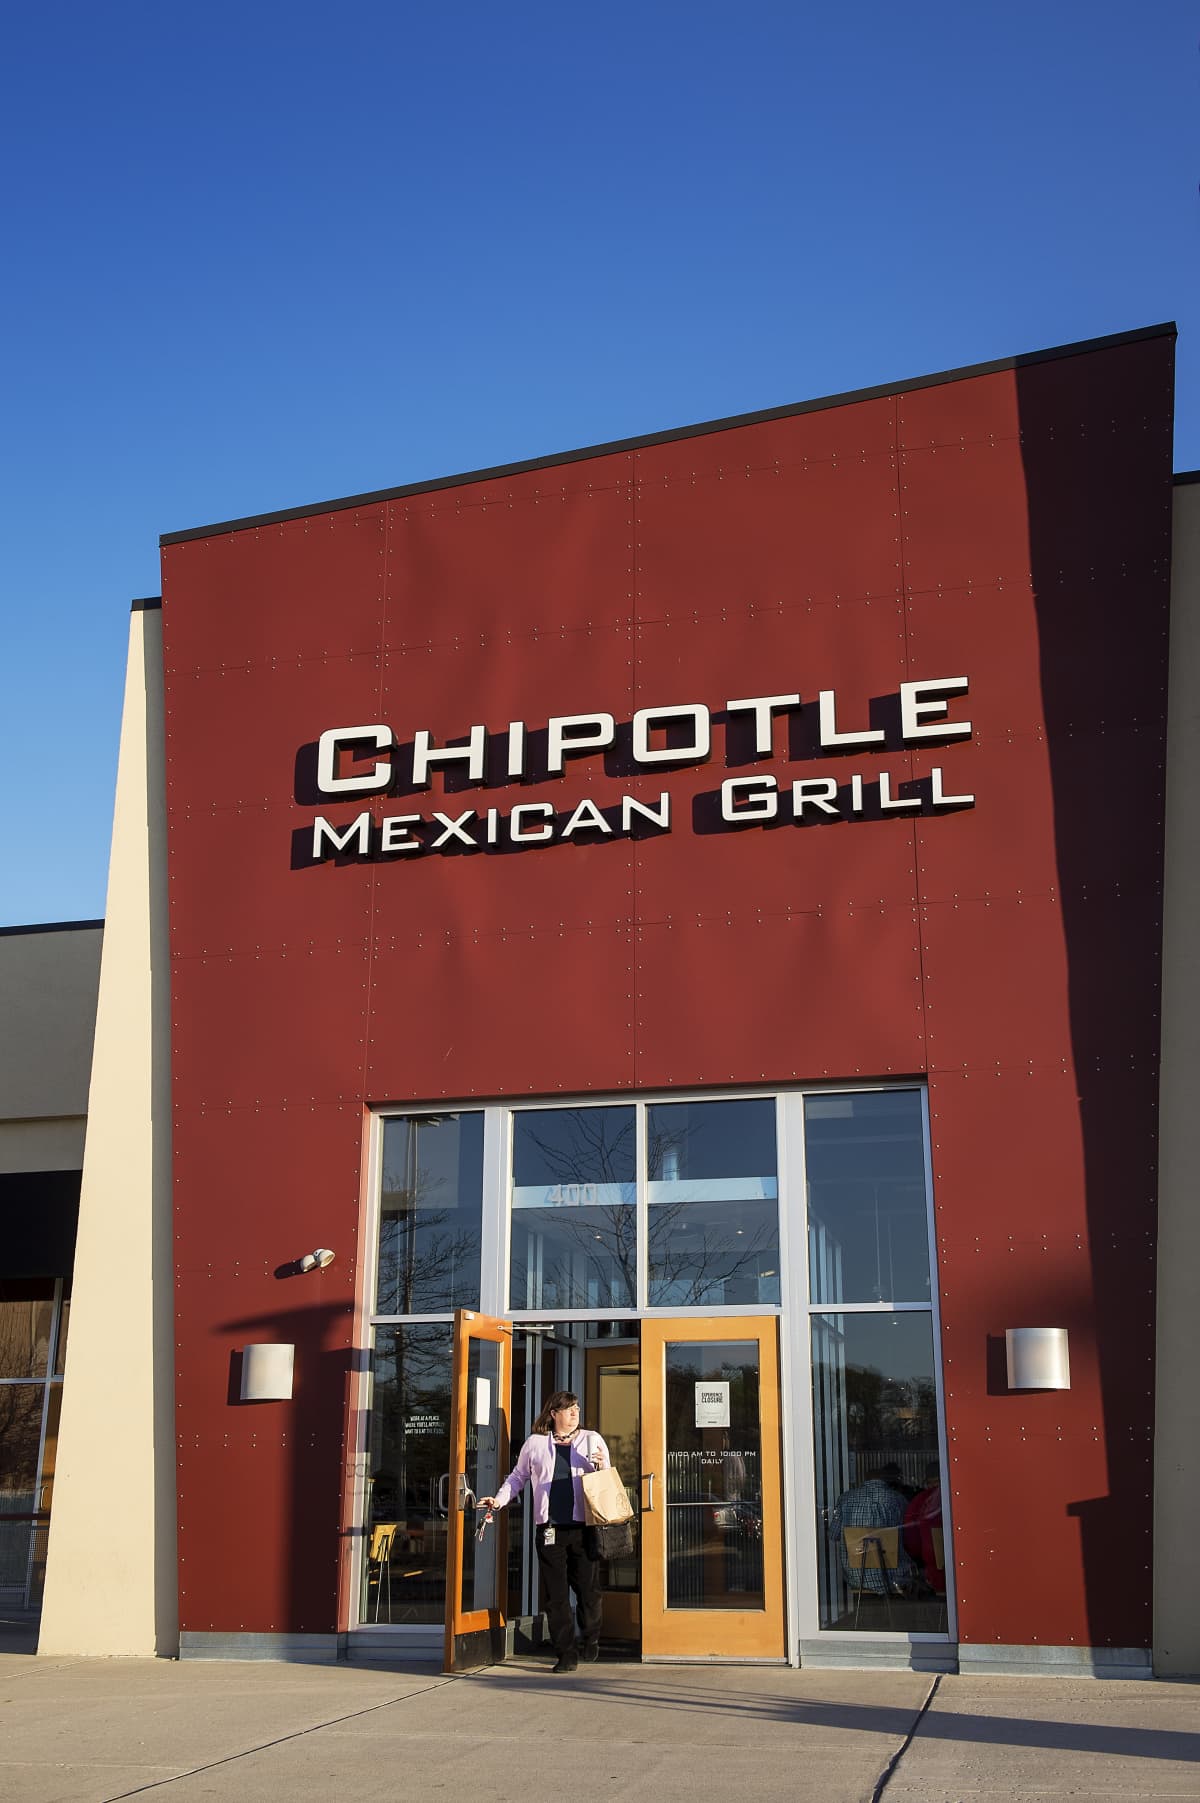 Vadnais Heights, Minnesota, Couple eating outside on patio at Chipotle Mexican Grill with a now hiring sign. It is an American chain of fast casual restaurants specializing in tacos and Mission burritos that are made to order for the customer. (Photo by: Michael Siluk/UCG/Universal Images Group via Getty Images)